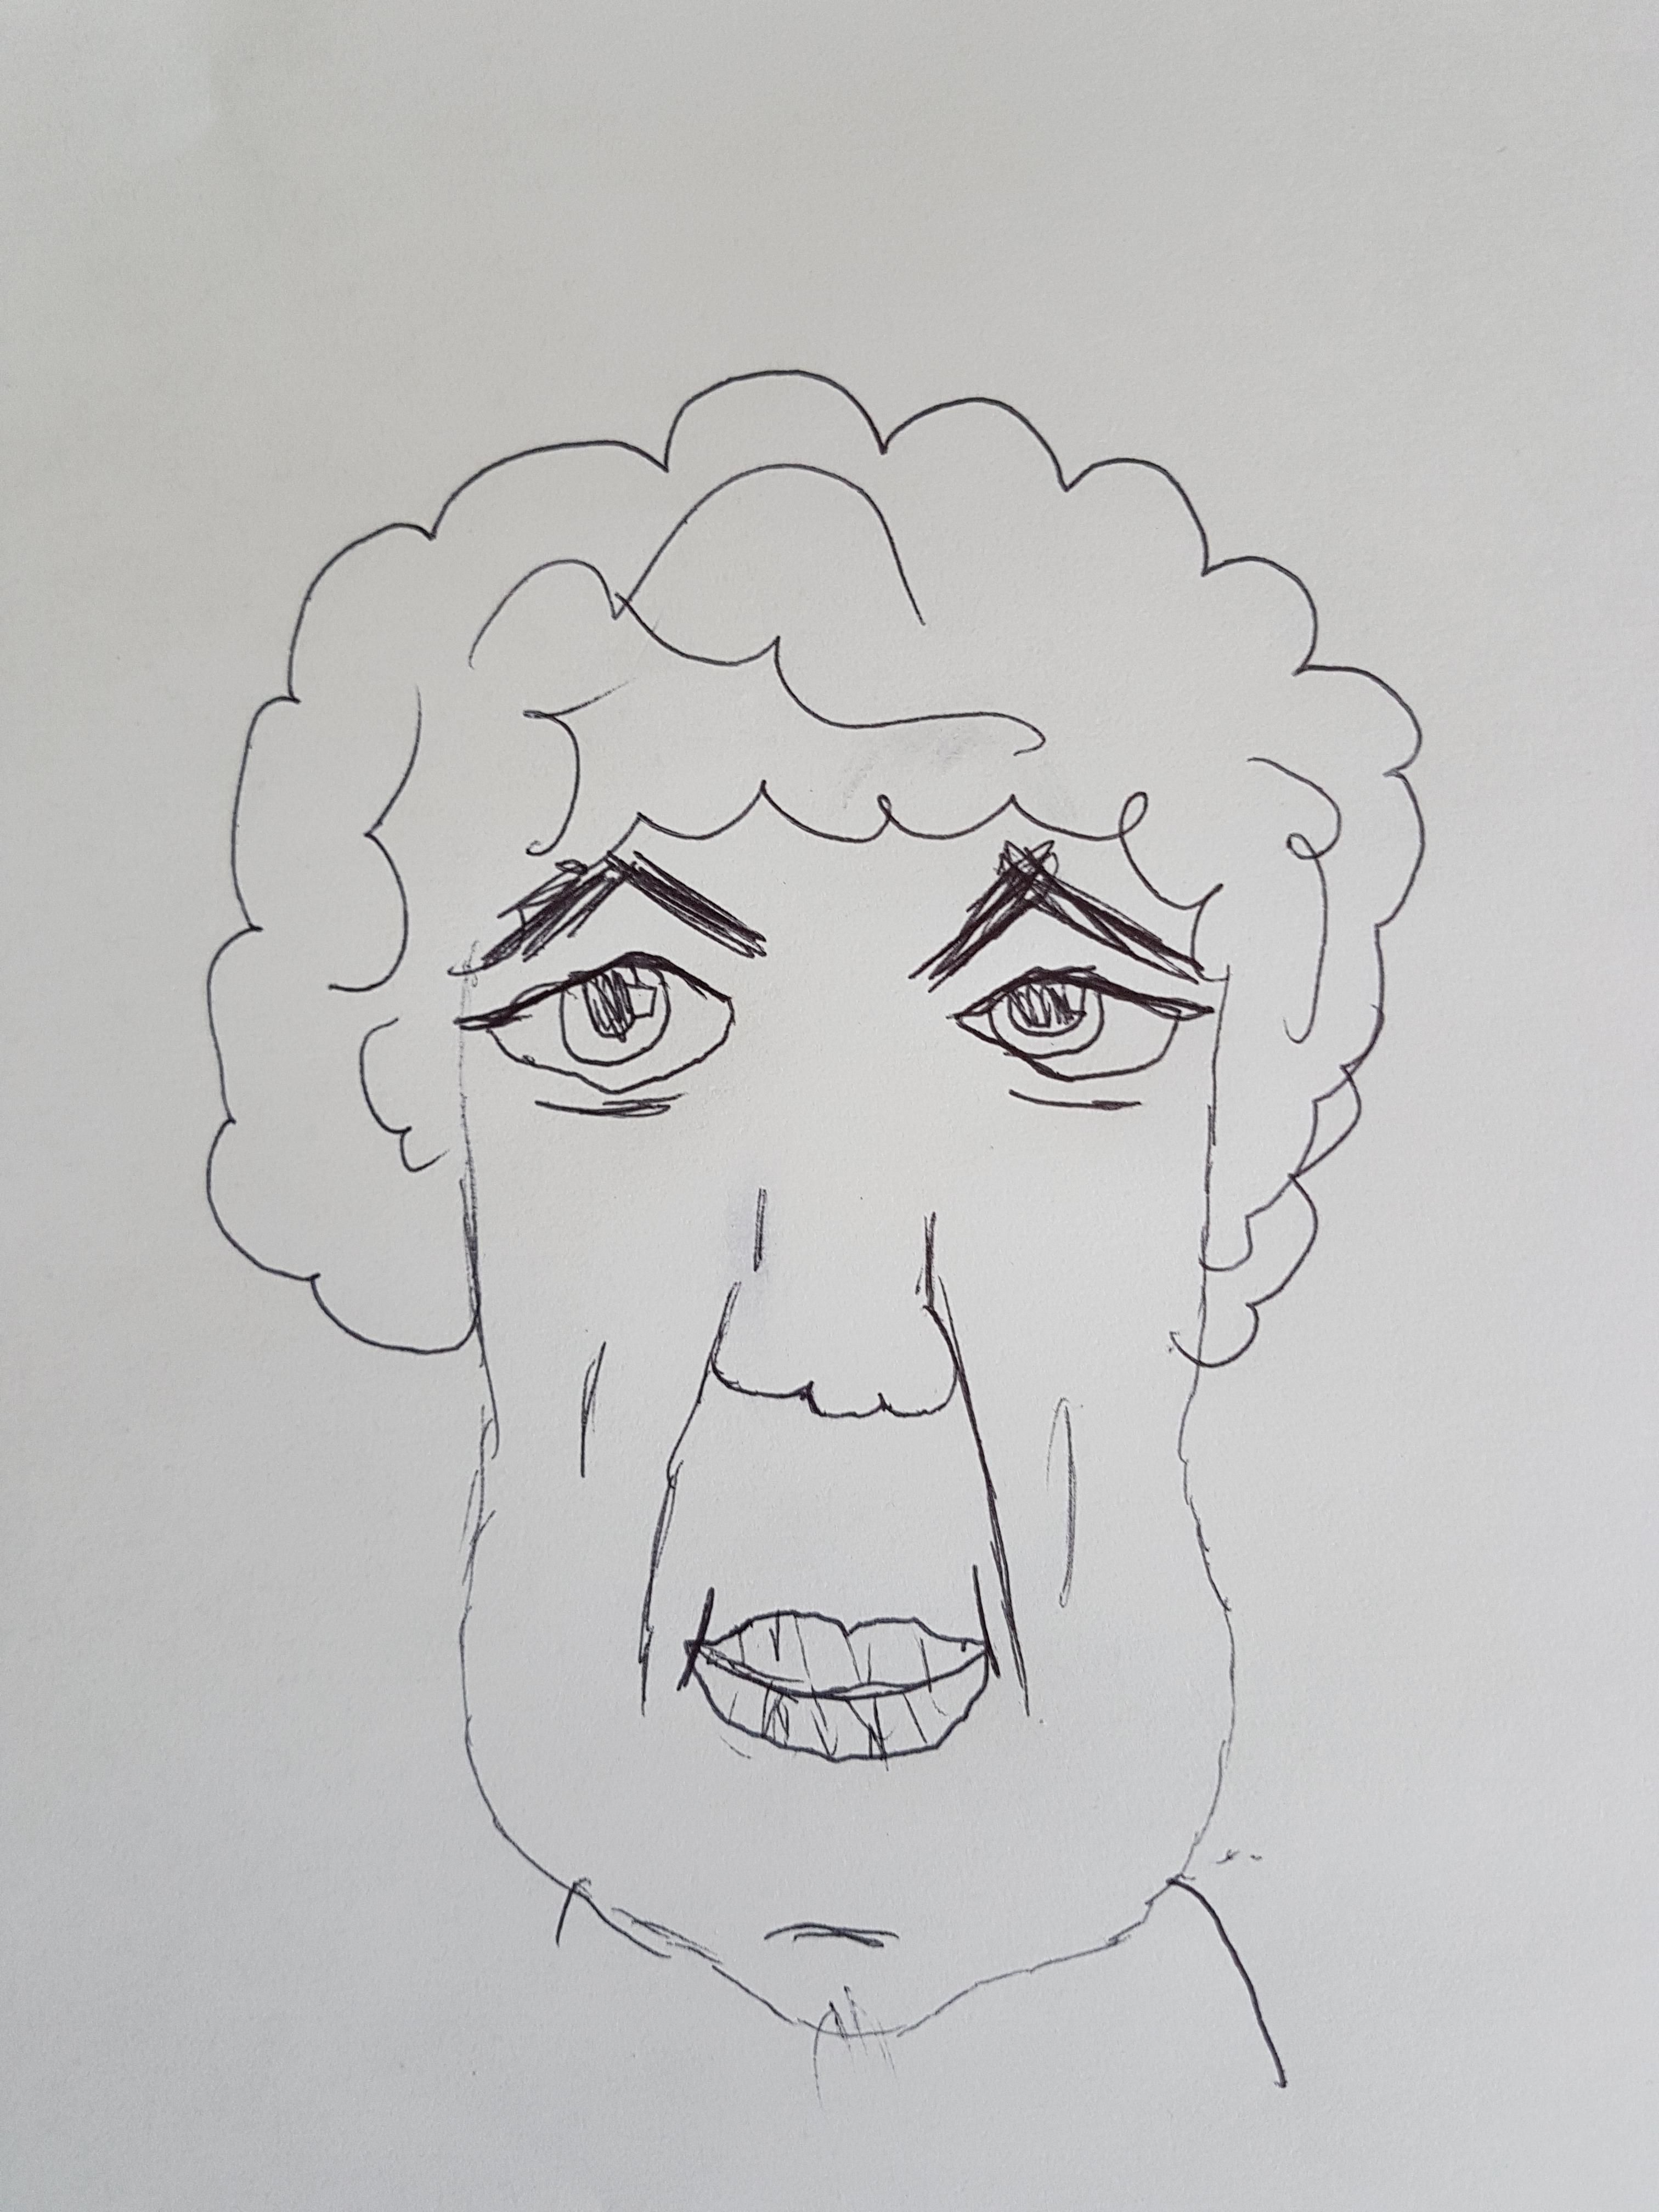 My 10-year-old daughter was drawing a picture of an old lady, and accidentally drew Jeremy Clarkson instead.